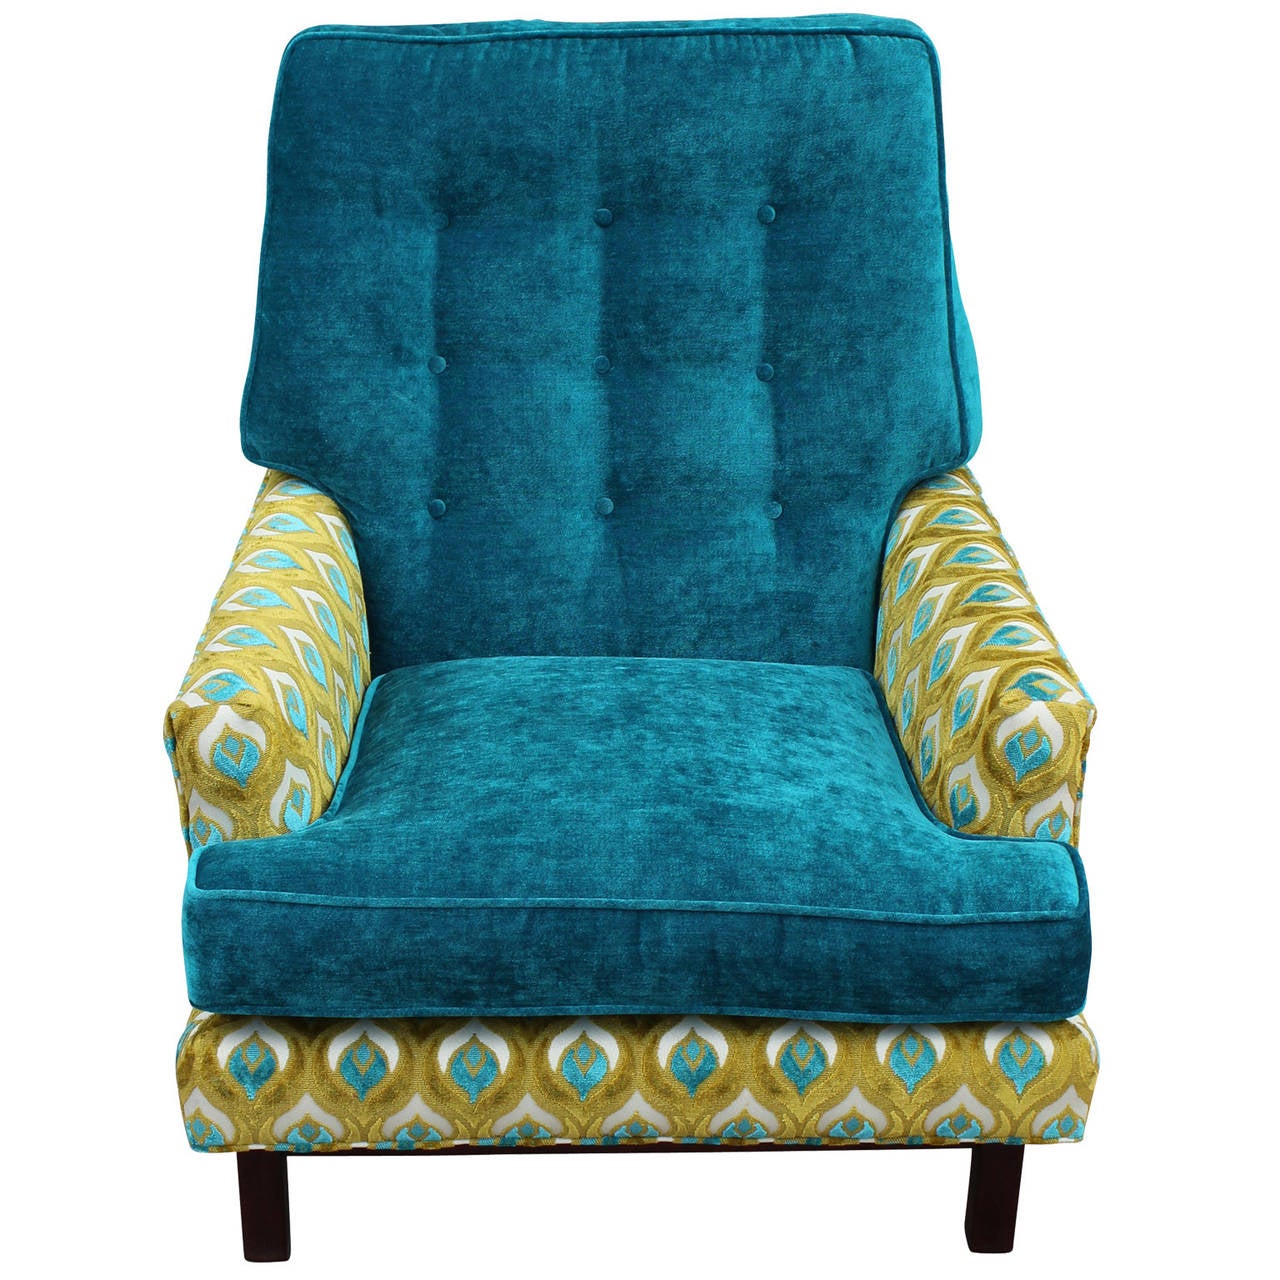 Wonderful armchair freshly upholstered in a patterned lime and peacock blue velvet with complementing peacock blue cushions. Wood base is stained a dark brown. Chair sits extremely comfortable. Perfect reading chair or focal point!